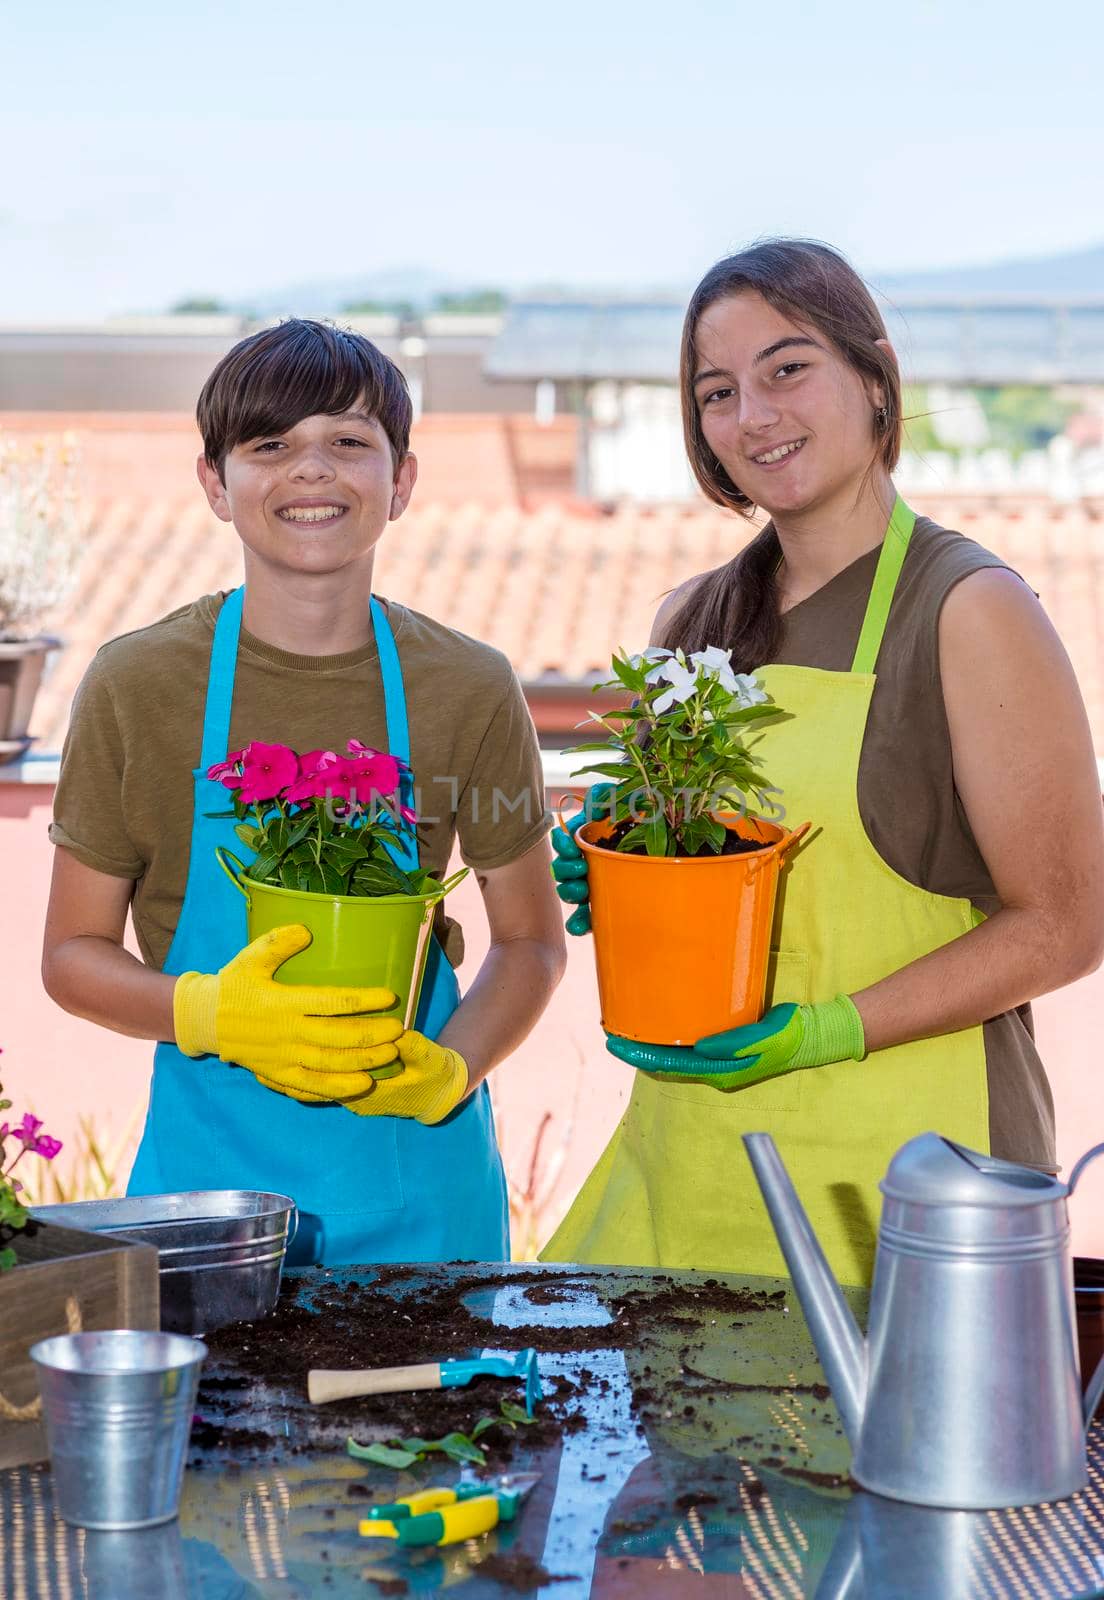 Two teenage holding plant pots while smiling on the terrace